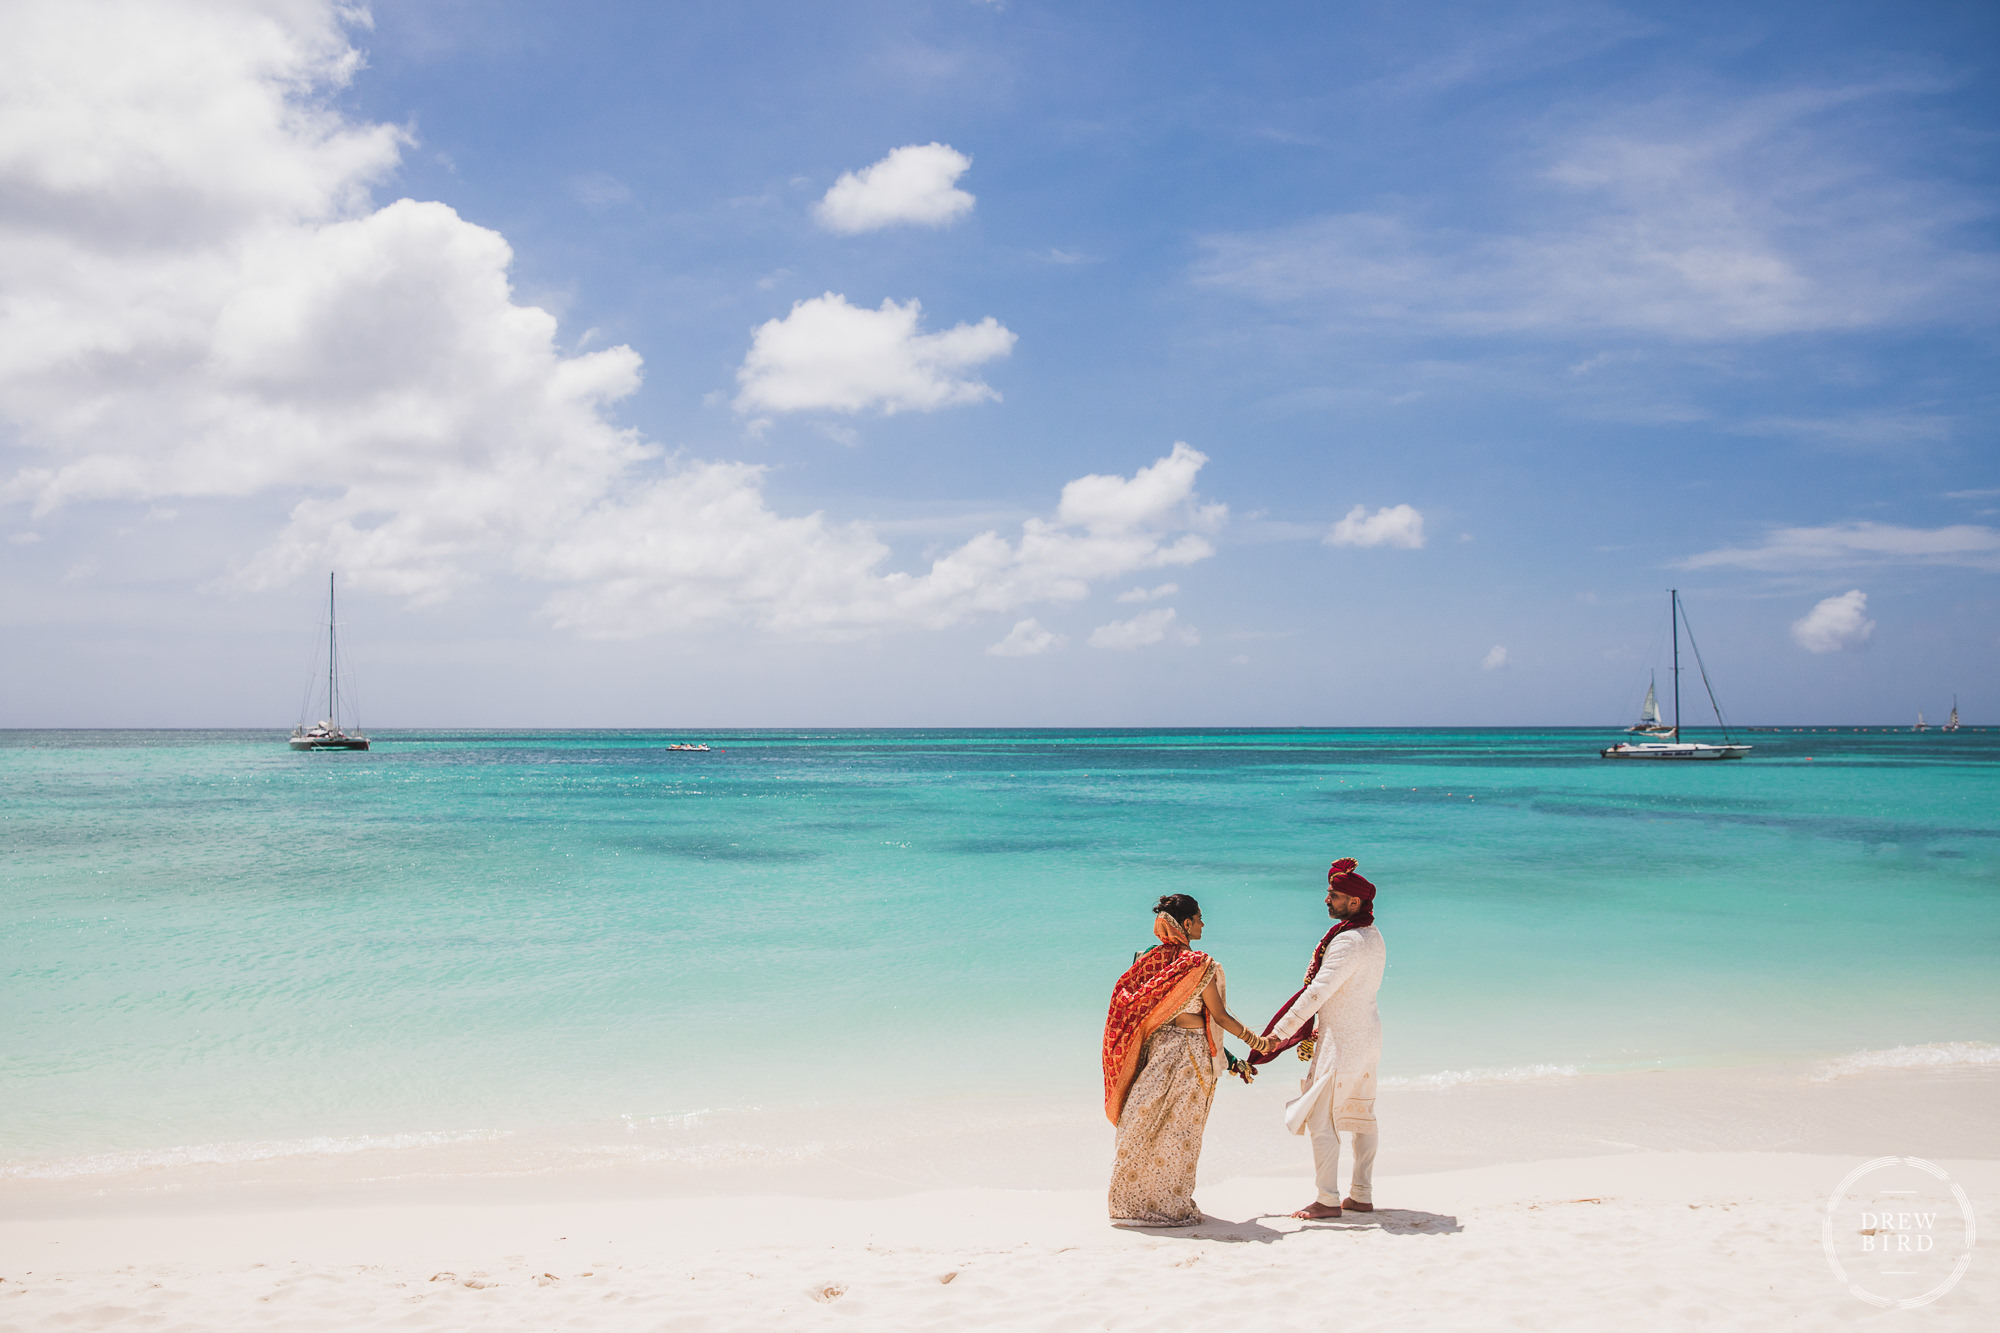 The Indian bride and groom stand on the beach at the water's edge holding hands for an artistic wedding portrait after their Hindu wedding ceremony on the beach at the Hilton Aruba Resort by SF photographer Drew Bird who specializes in wedding photography for Indian weddings.